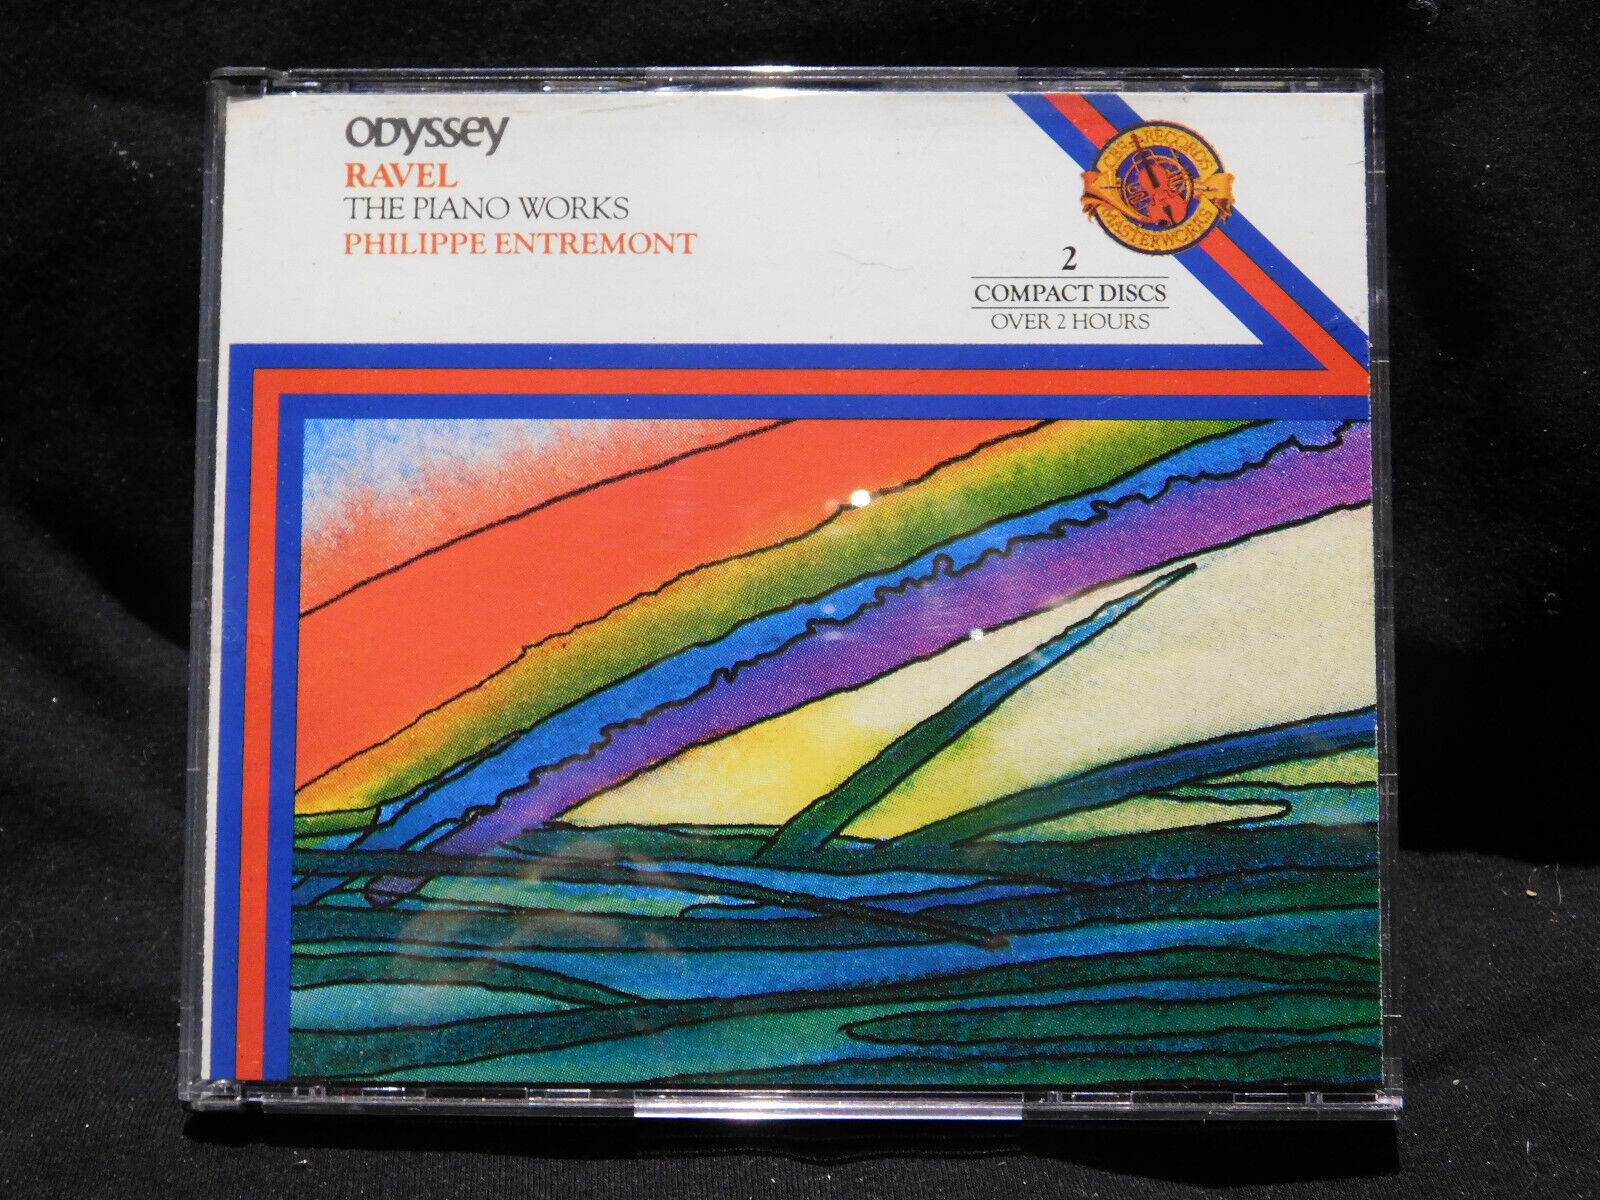 Odyssey RAVEL THE PIANO WORKS Philppe Entremont CD Set 1989, CBS